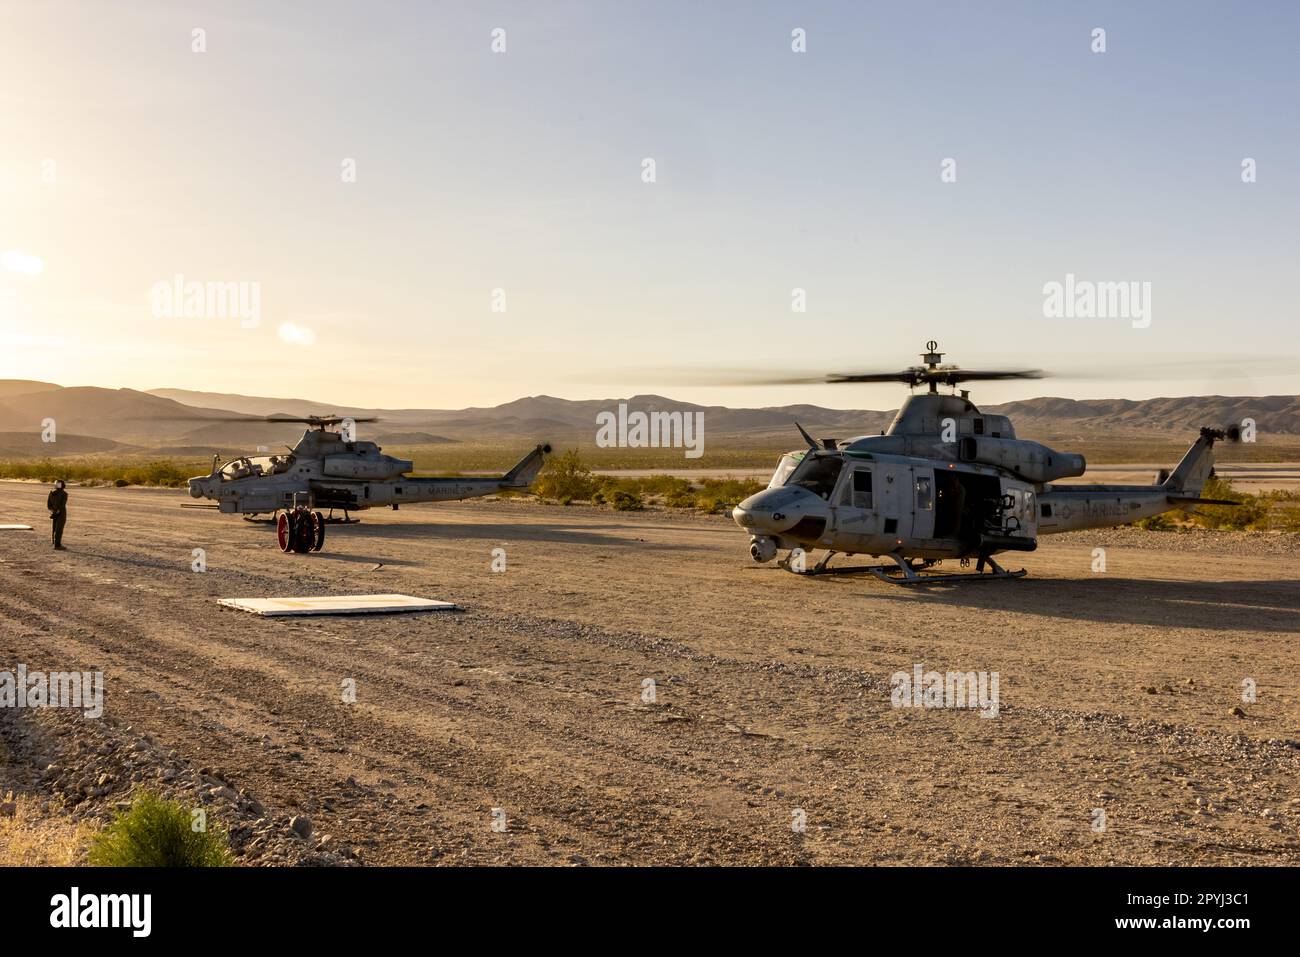 A U.S. Marine Corps UH-1Y Venom and an AH-1Z Viper, with Marine Light Attack Helicopter Squadron (HMLA) 367, Marine Aircraft Group 39, 3rd Marine Aircraft Wing, power up for a training mission during National Training Center Rotation 23-07 at Fort Irwin, California, April 27, 2023. During the exercise, HMLA-367 is supporting the 75th Ranger Regiment and 160th Special Operations Aviation Regiment (SOAR) as the sole rotary-wing fire support element, enhancing joint planning and execution of long-range assault force escort, deep and close air support, and direct-action raids. (U.S. Marine Corps p Stock Photo